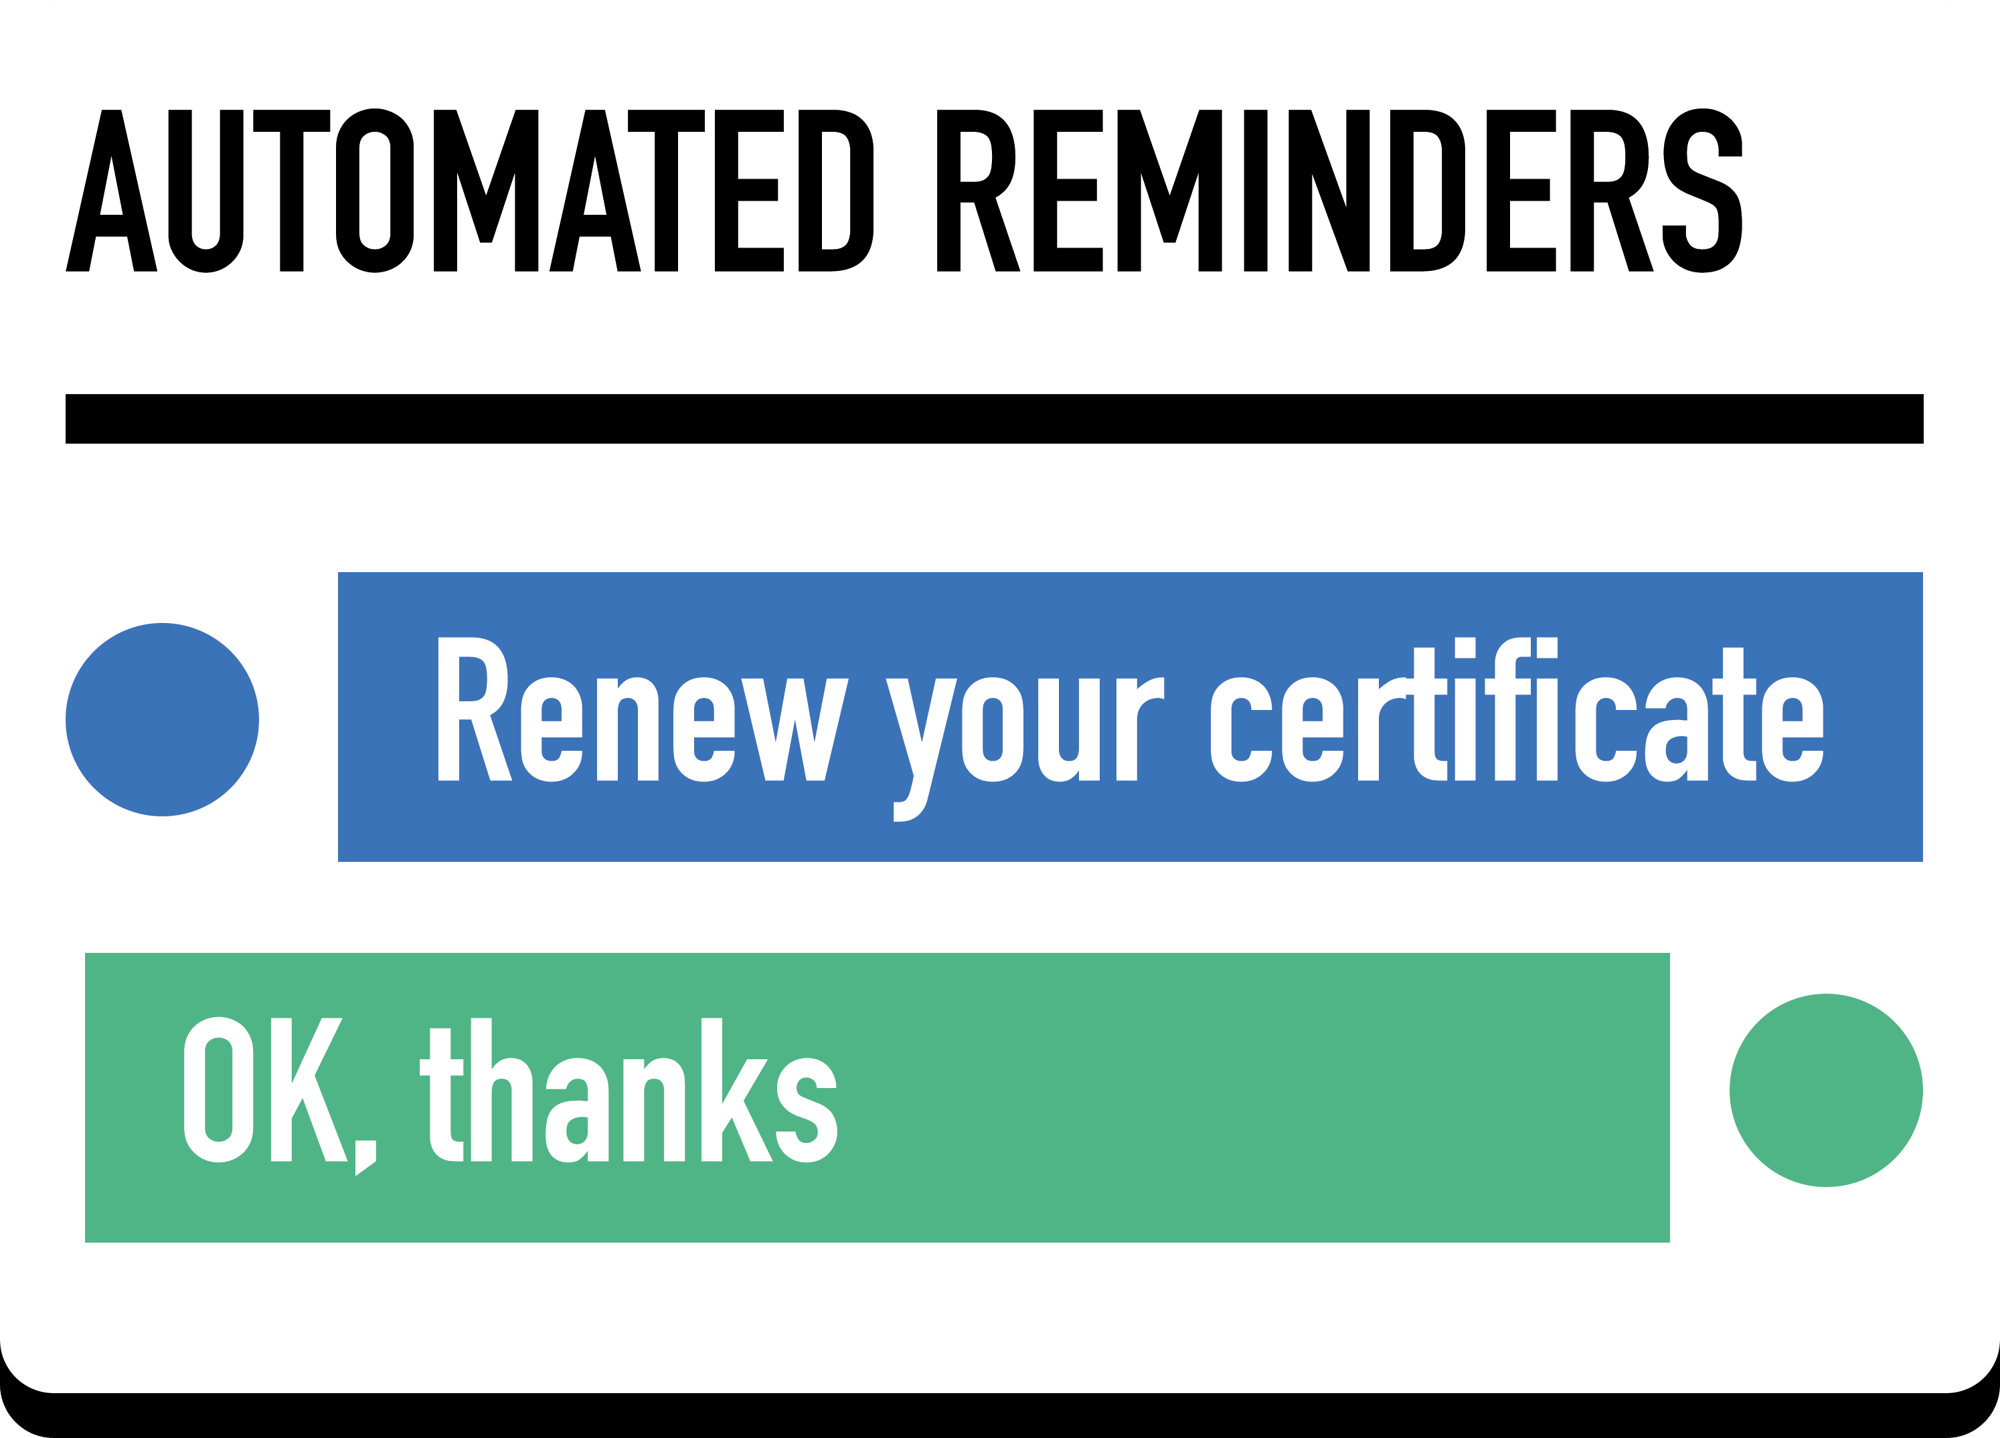 Reminders for the building trade